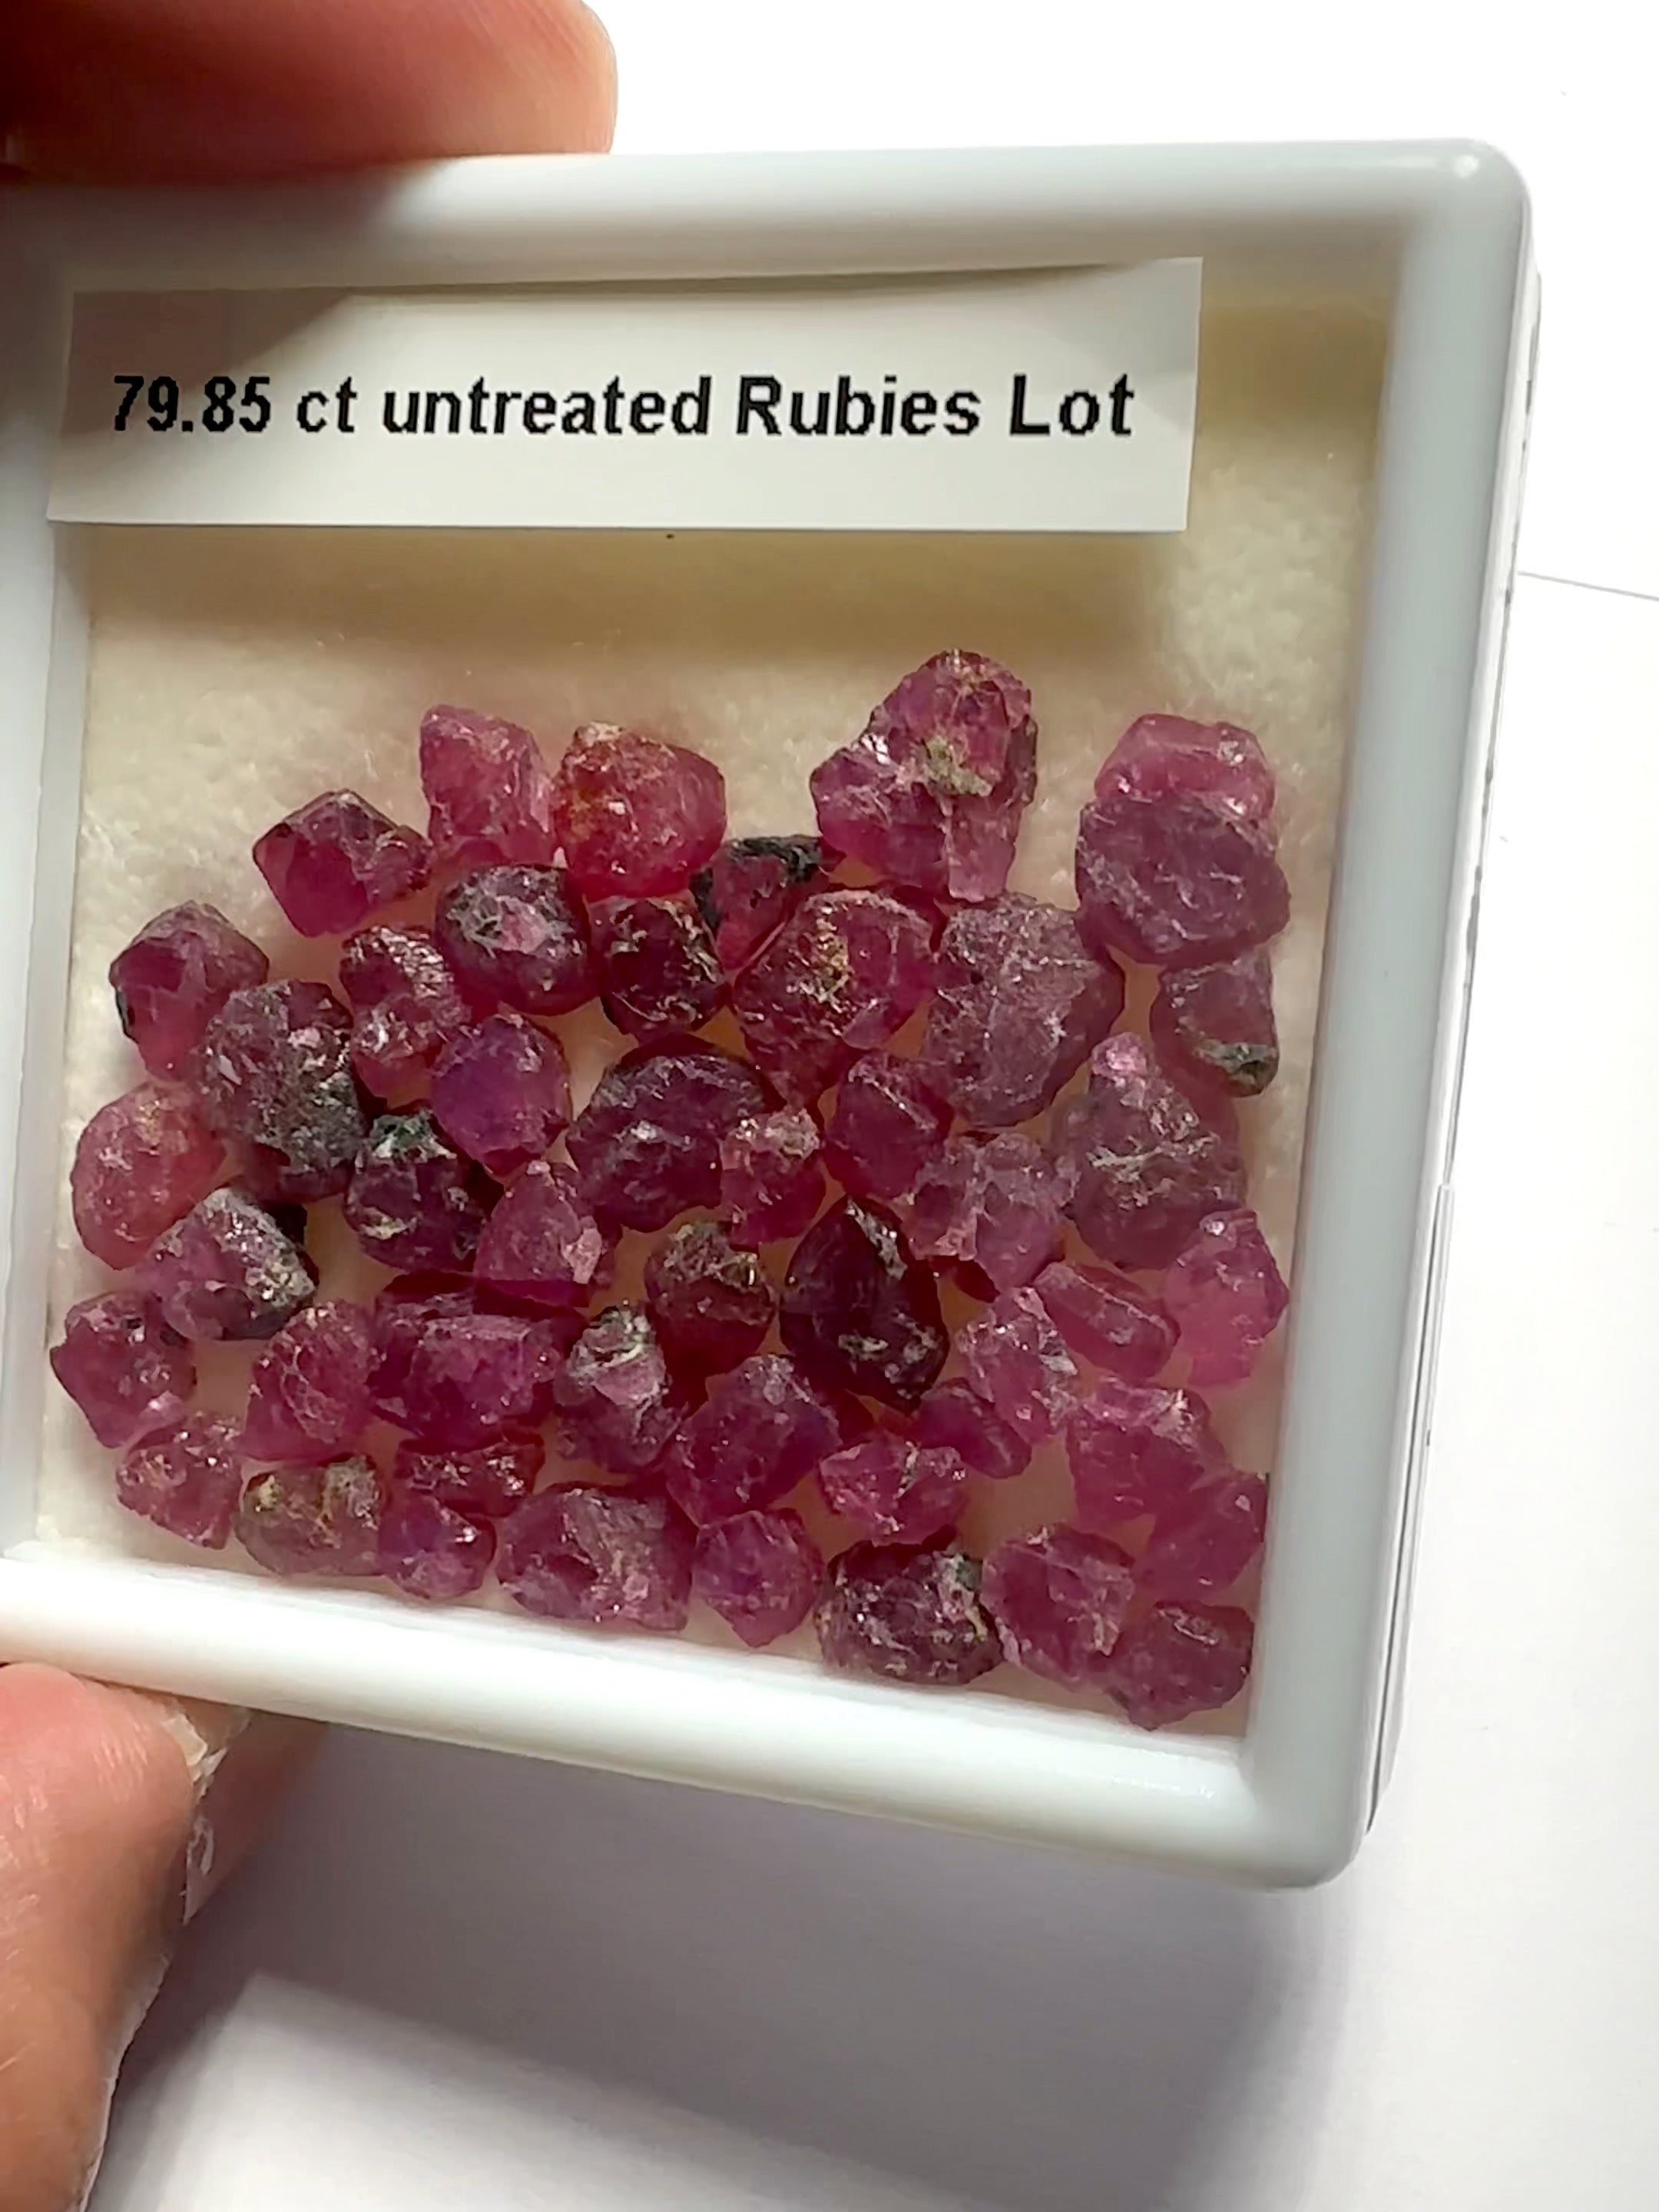 79.85ct Ruby Lot, Winza, Tanzania, Untreated Unheated, good for setting as is